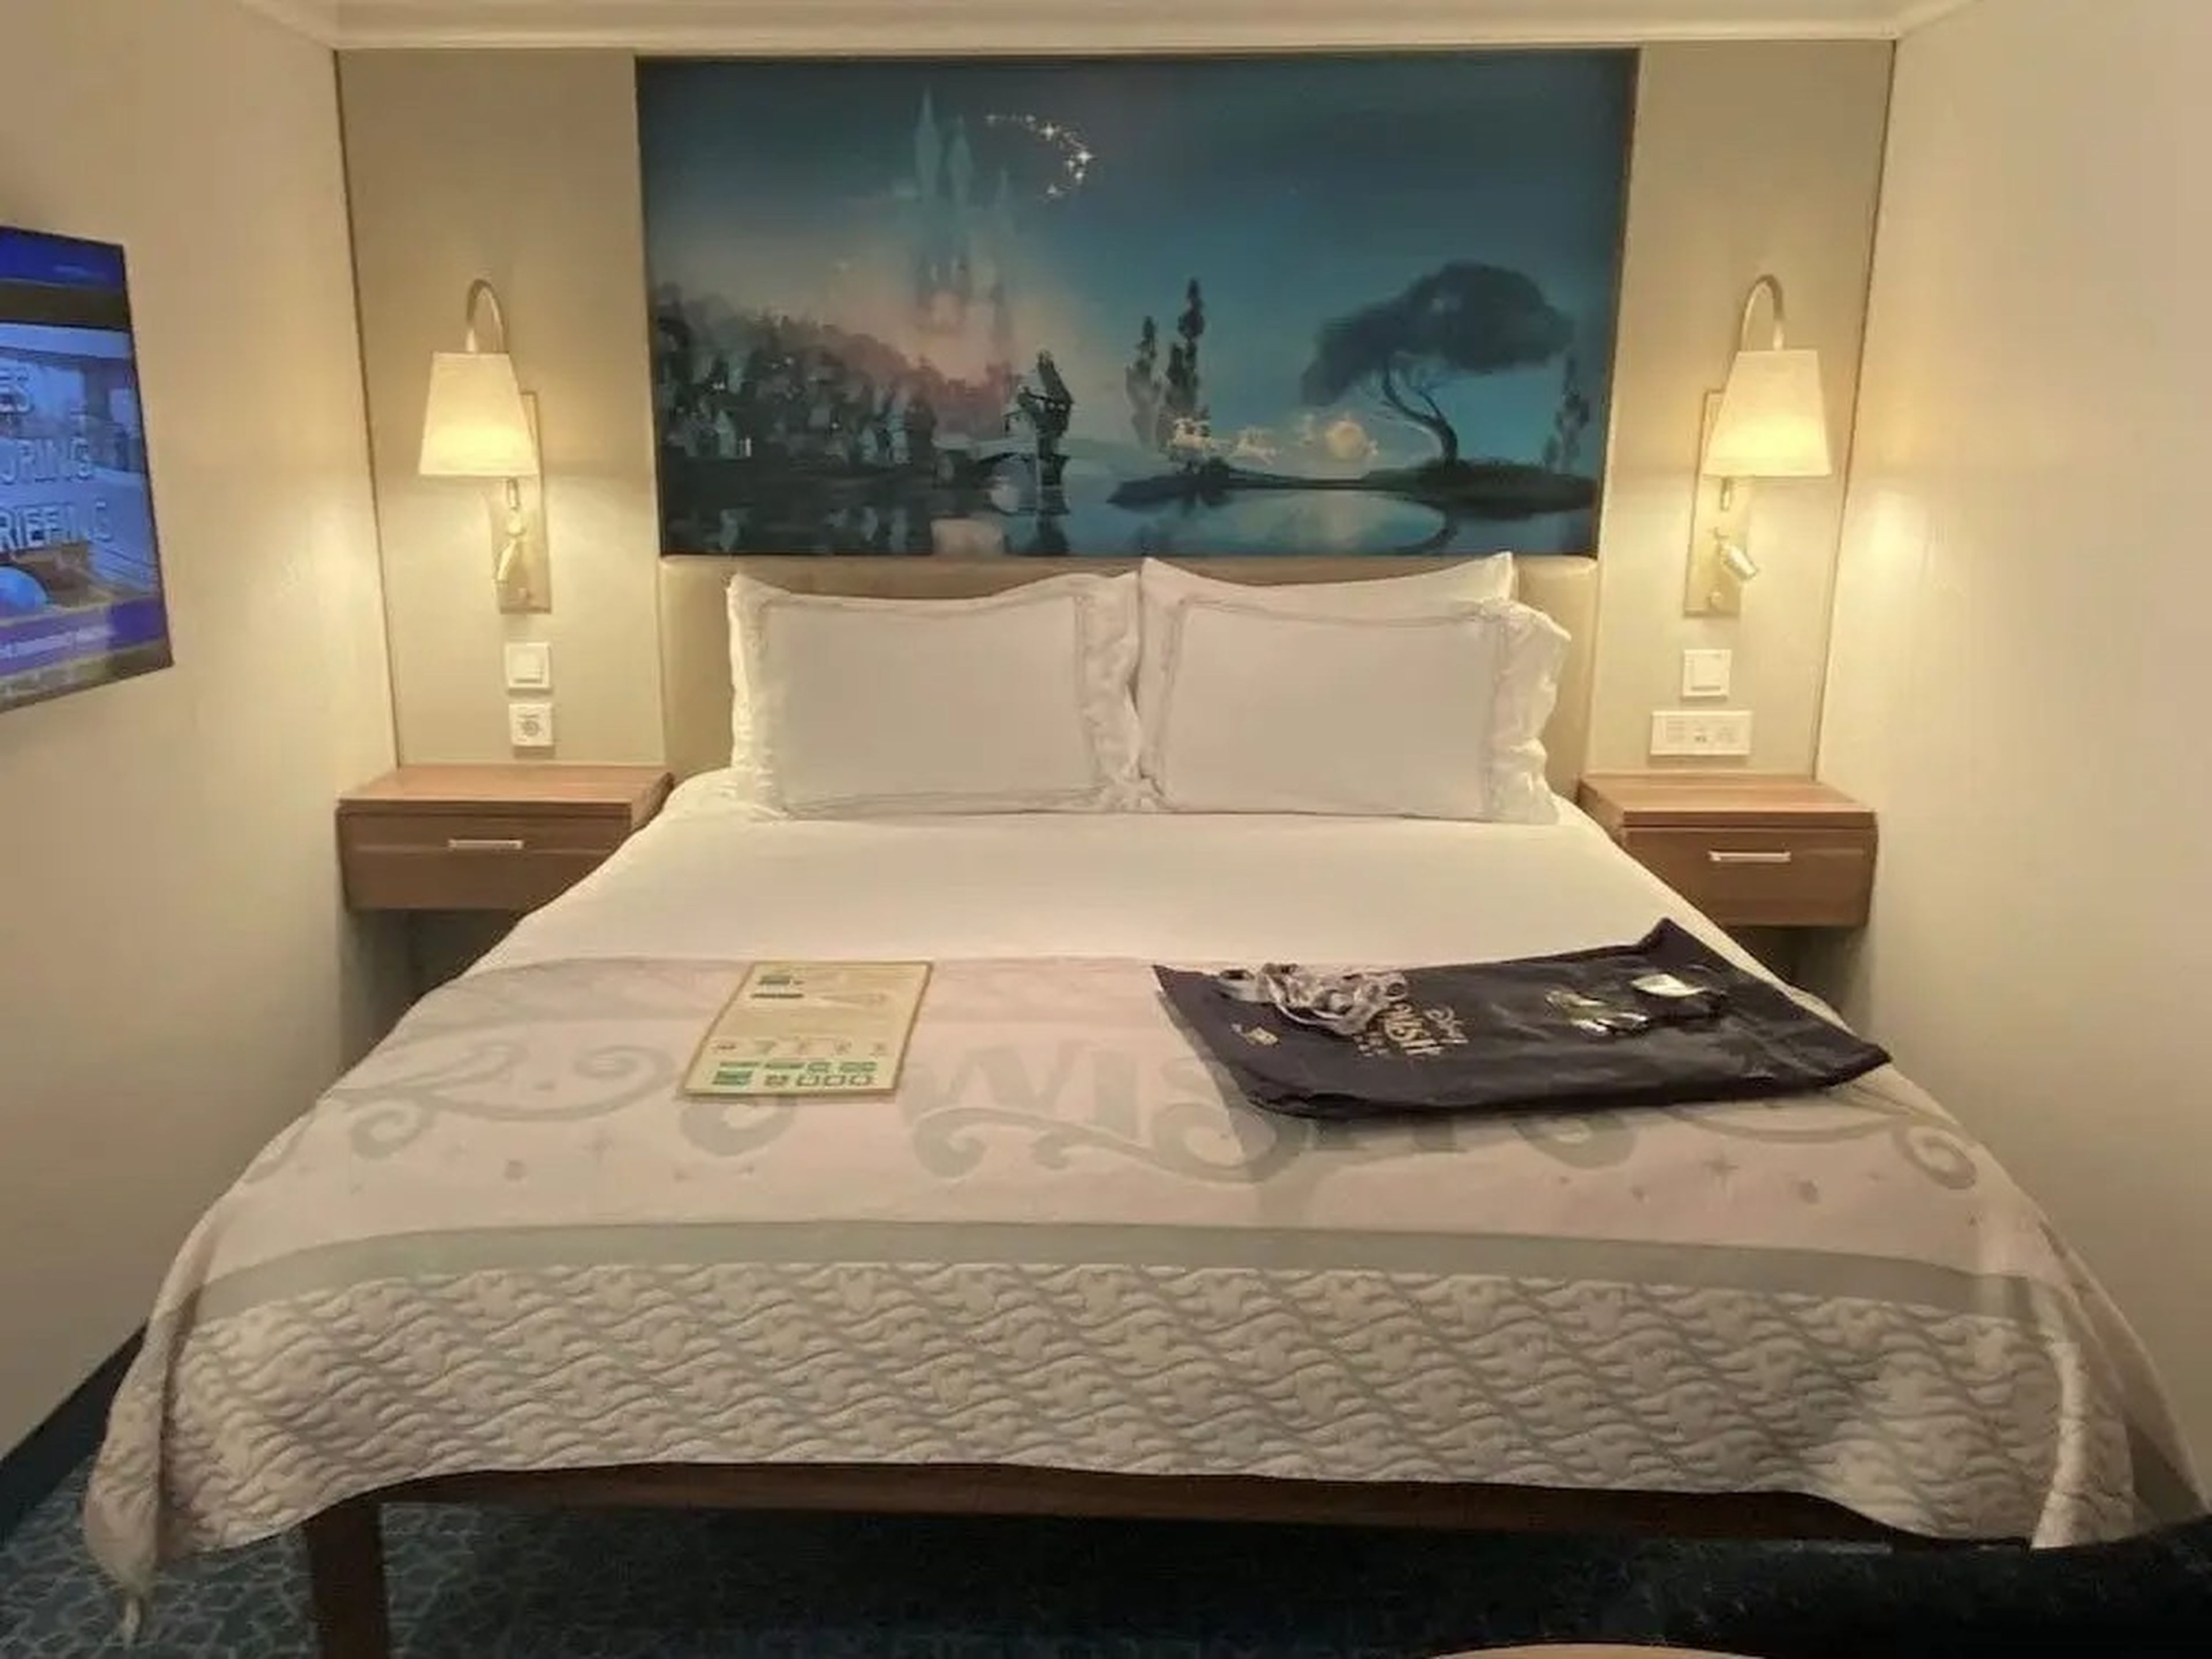 The bed area of a standard stateroom aboard the Disney Wish cruise.